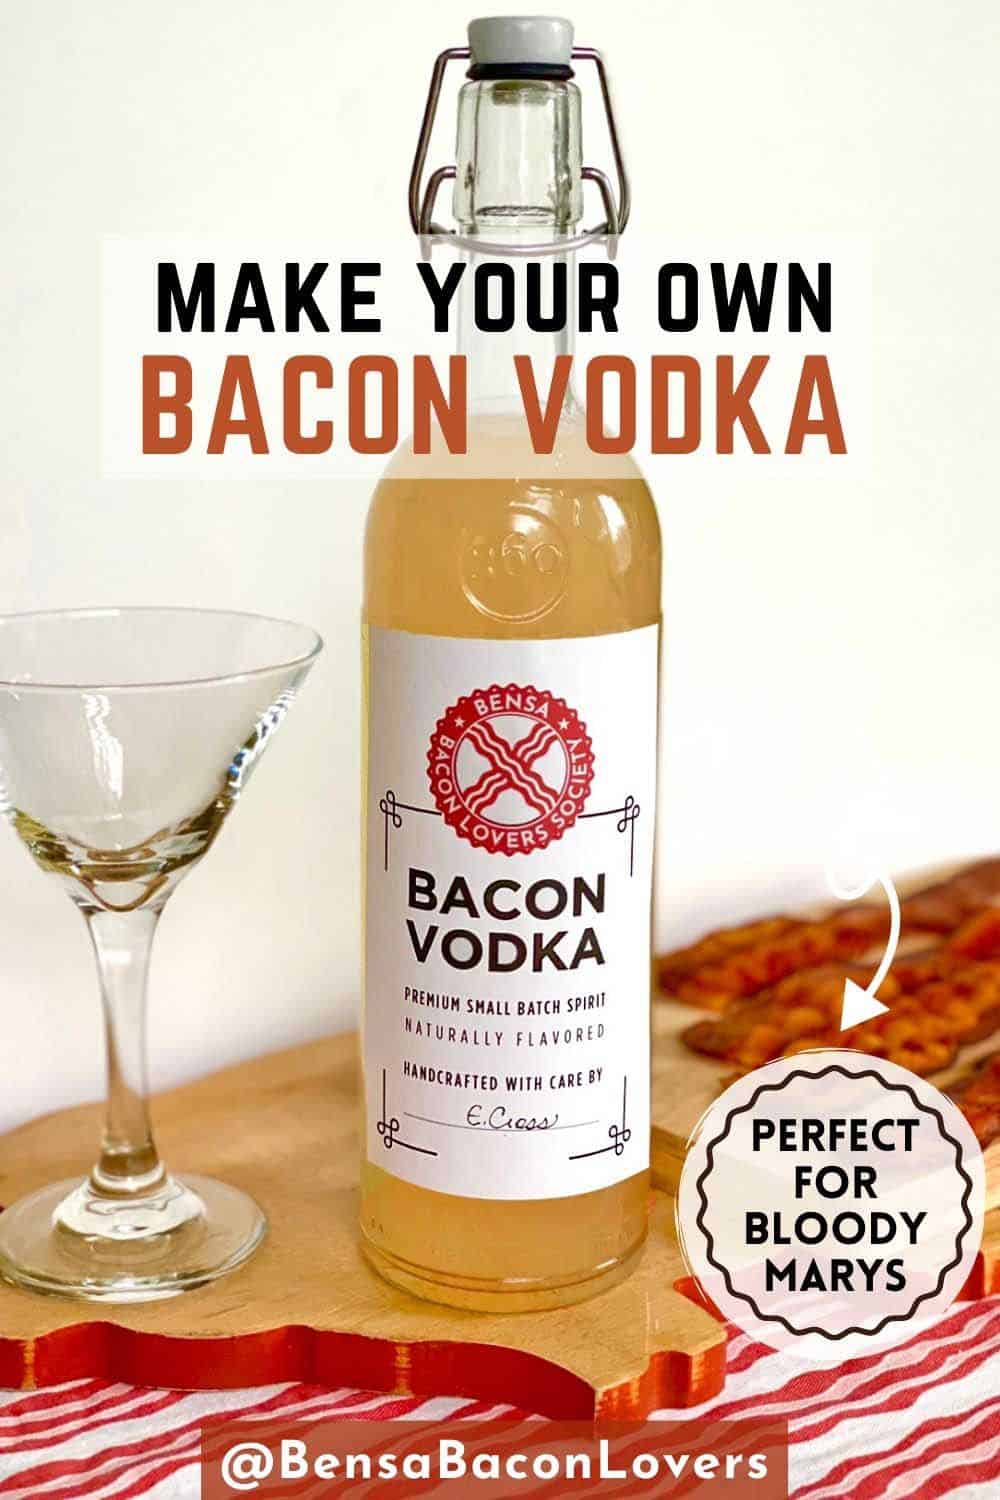 A bottle of bacon vodka on a cutting board near four strips of cooked bacon and an empty martini glass.